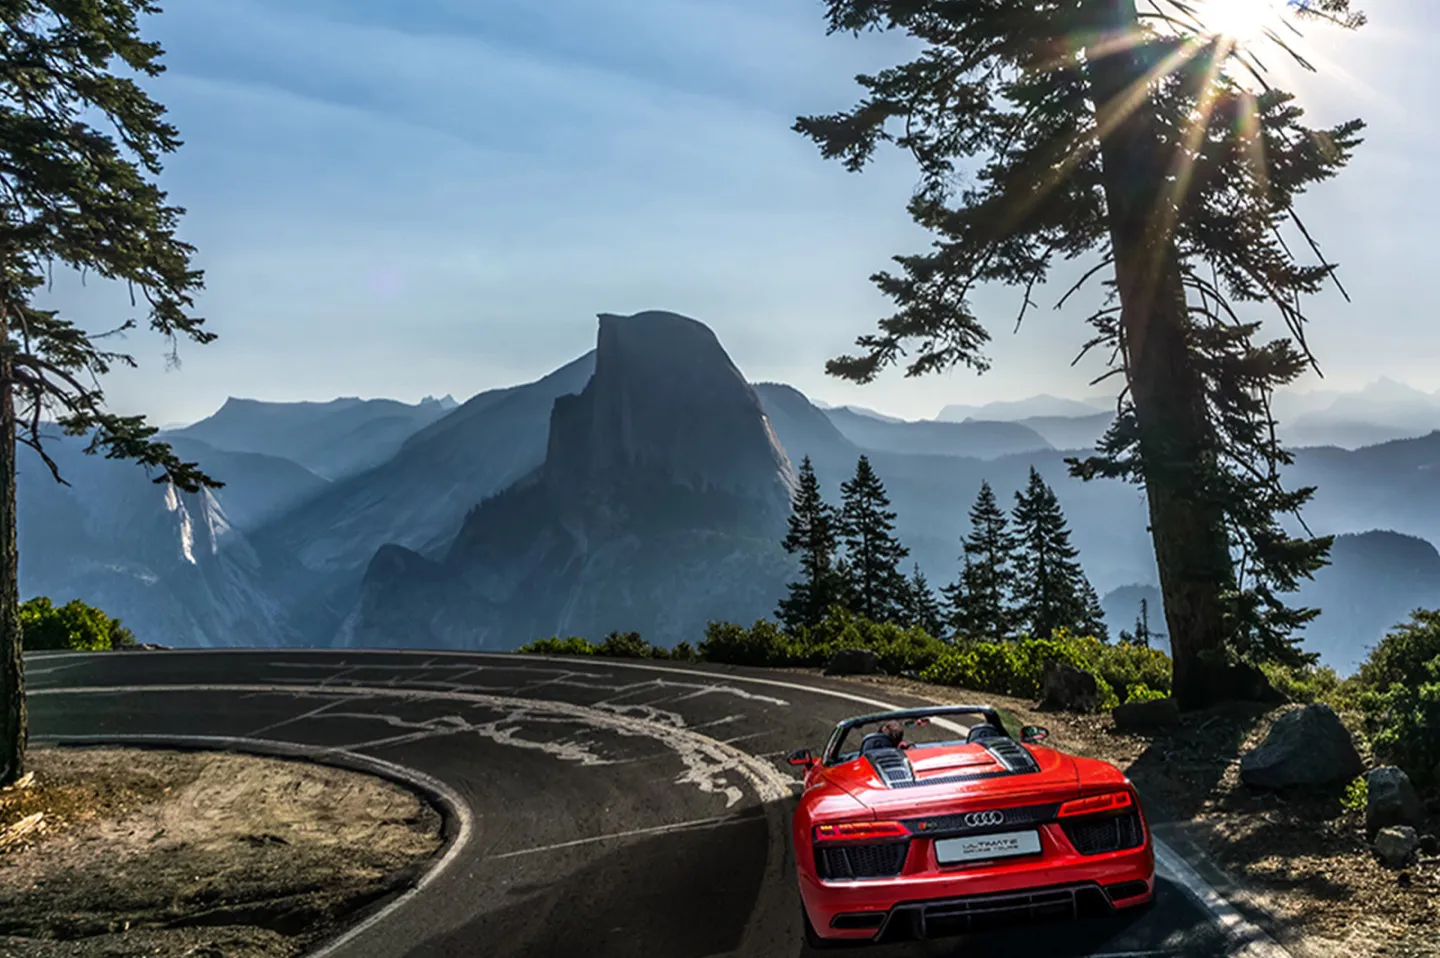 Drive an exotic car through the national parks of the California coastline